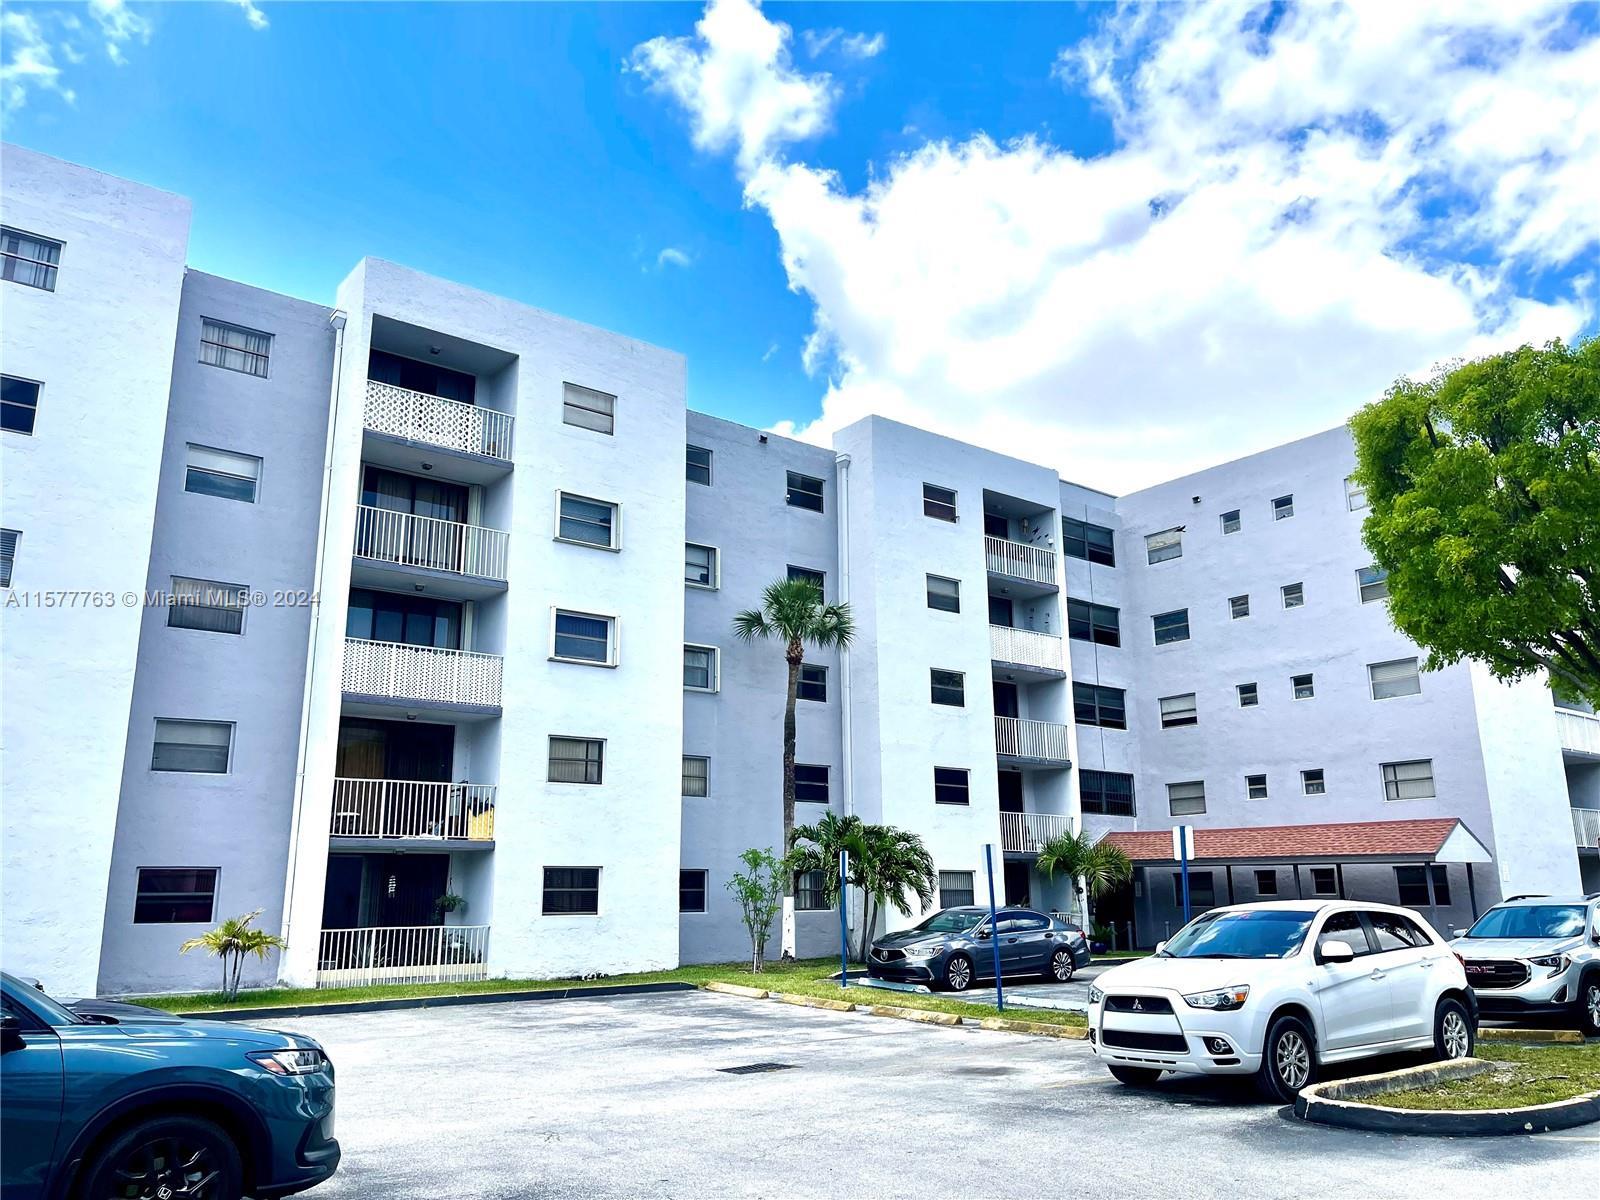 Photo of 8185 NW 7th St #209 in Miami, FL